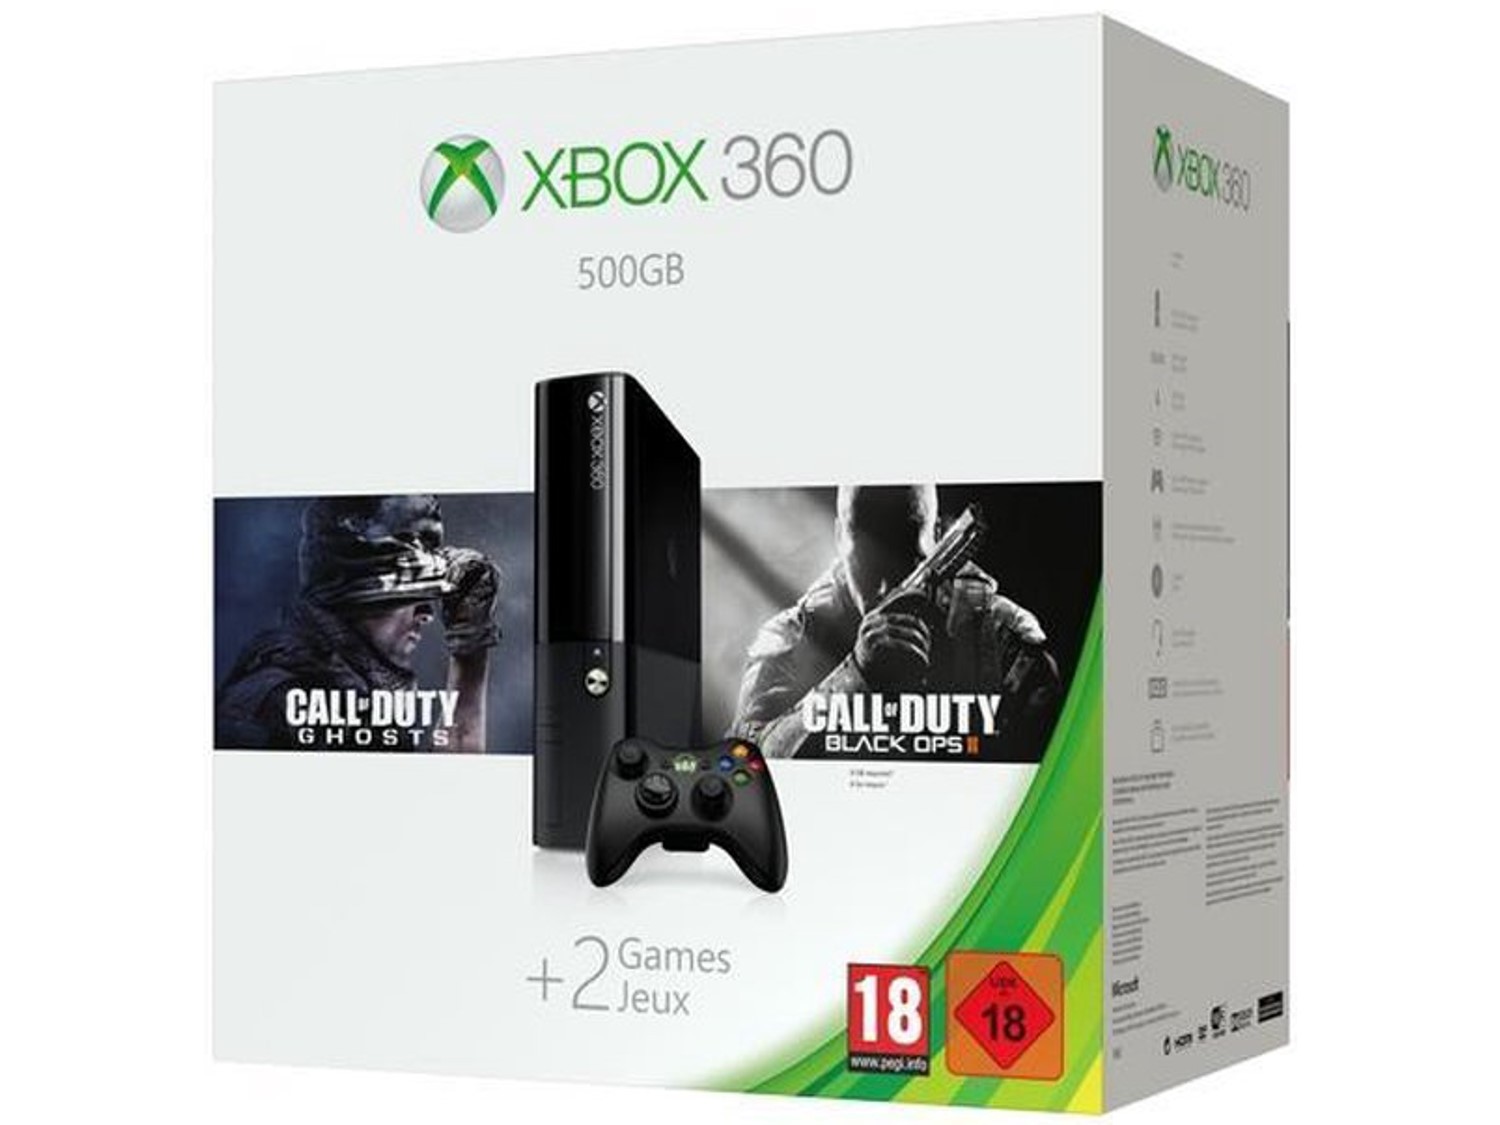 Microsoft Xbox 360 New Slim Starter Pack - 500GB Call of Duty Edition [Complete] Kopen | Xbox 360 Hardware